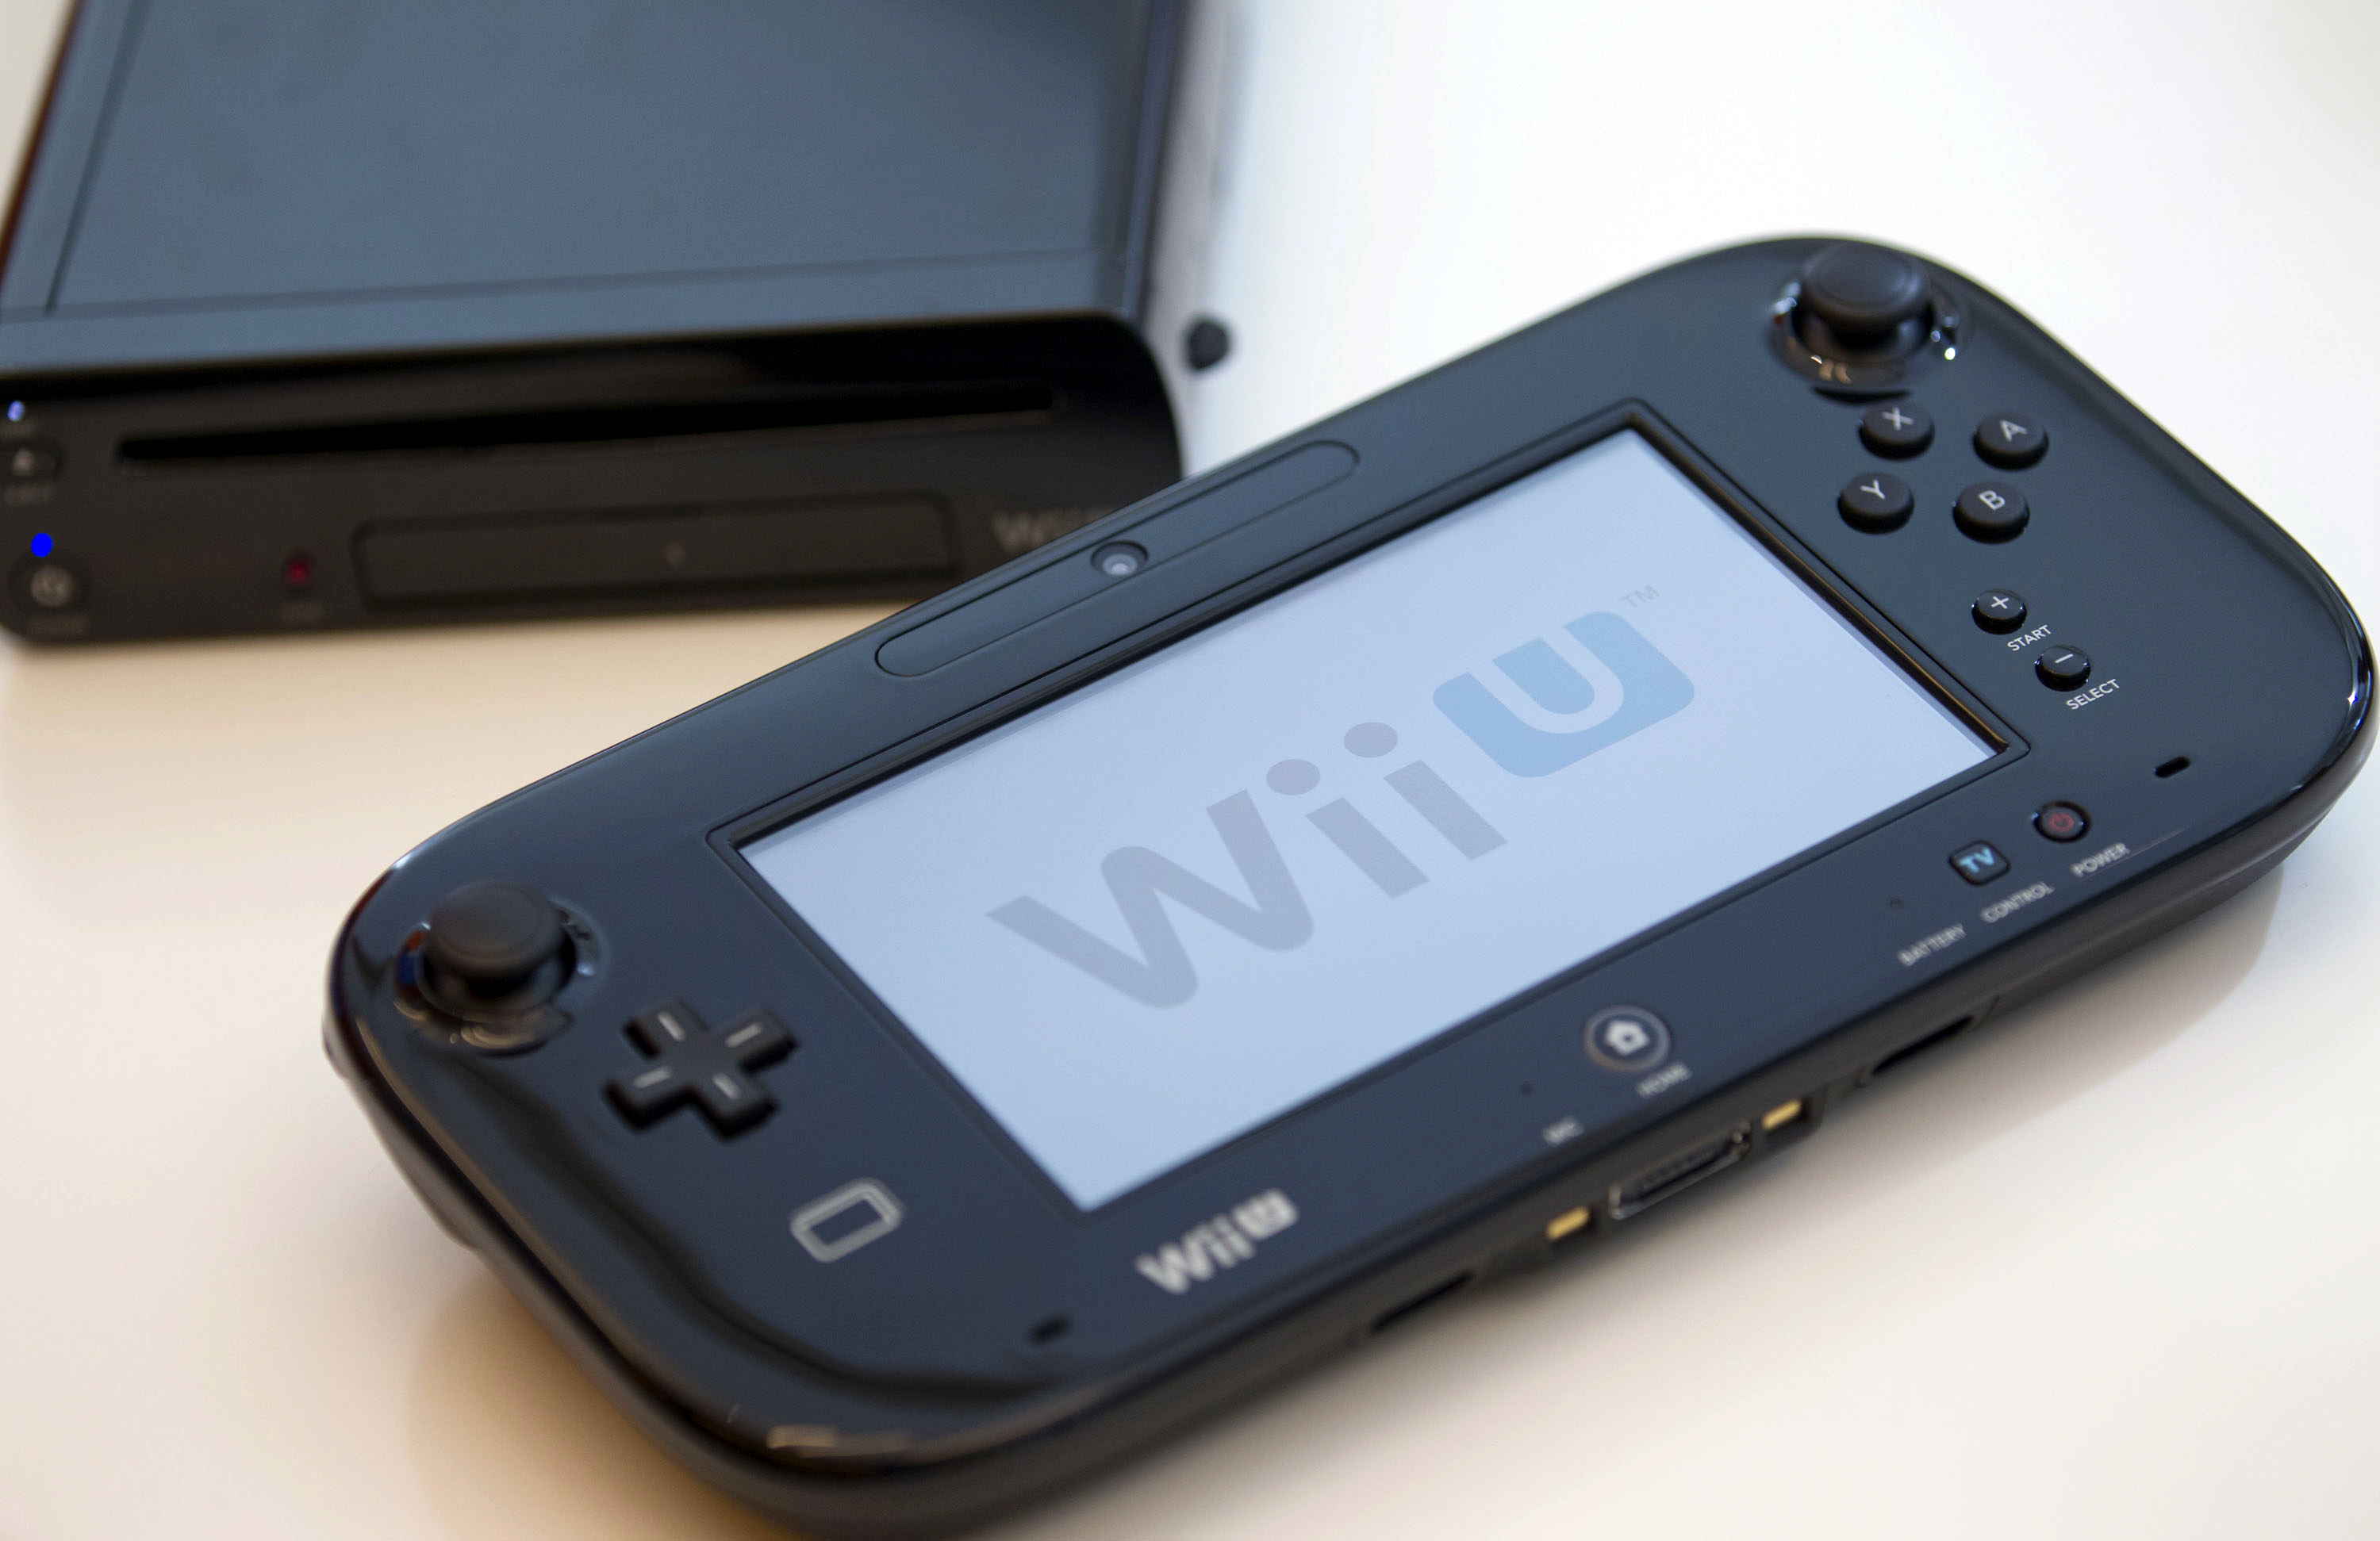 Nintendo's Wii U console, above, and touch-pad controller sit on display during an interview with Reggie Fils-Aime, president of Nintendo of America Inc., in New York, U.S., on Friday, Sept. 14, 2012. (Bloomberg&mdash;Bloomberg via Getty Images)